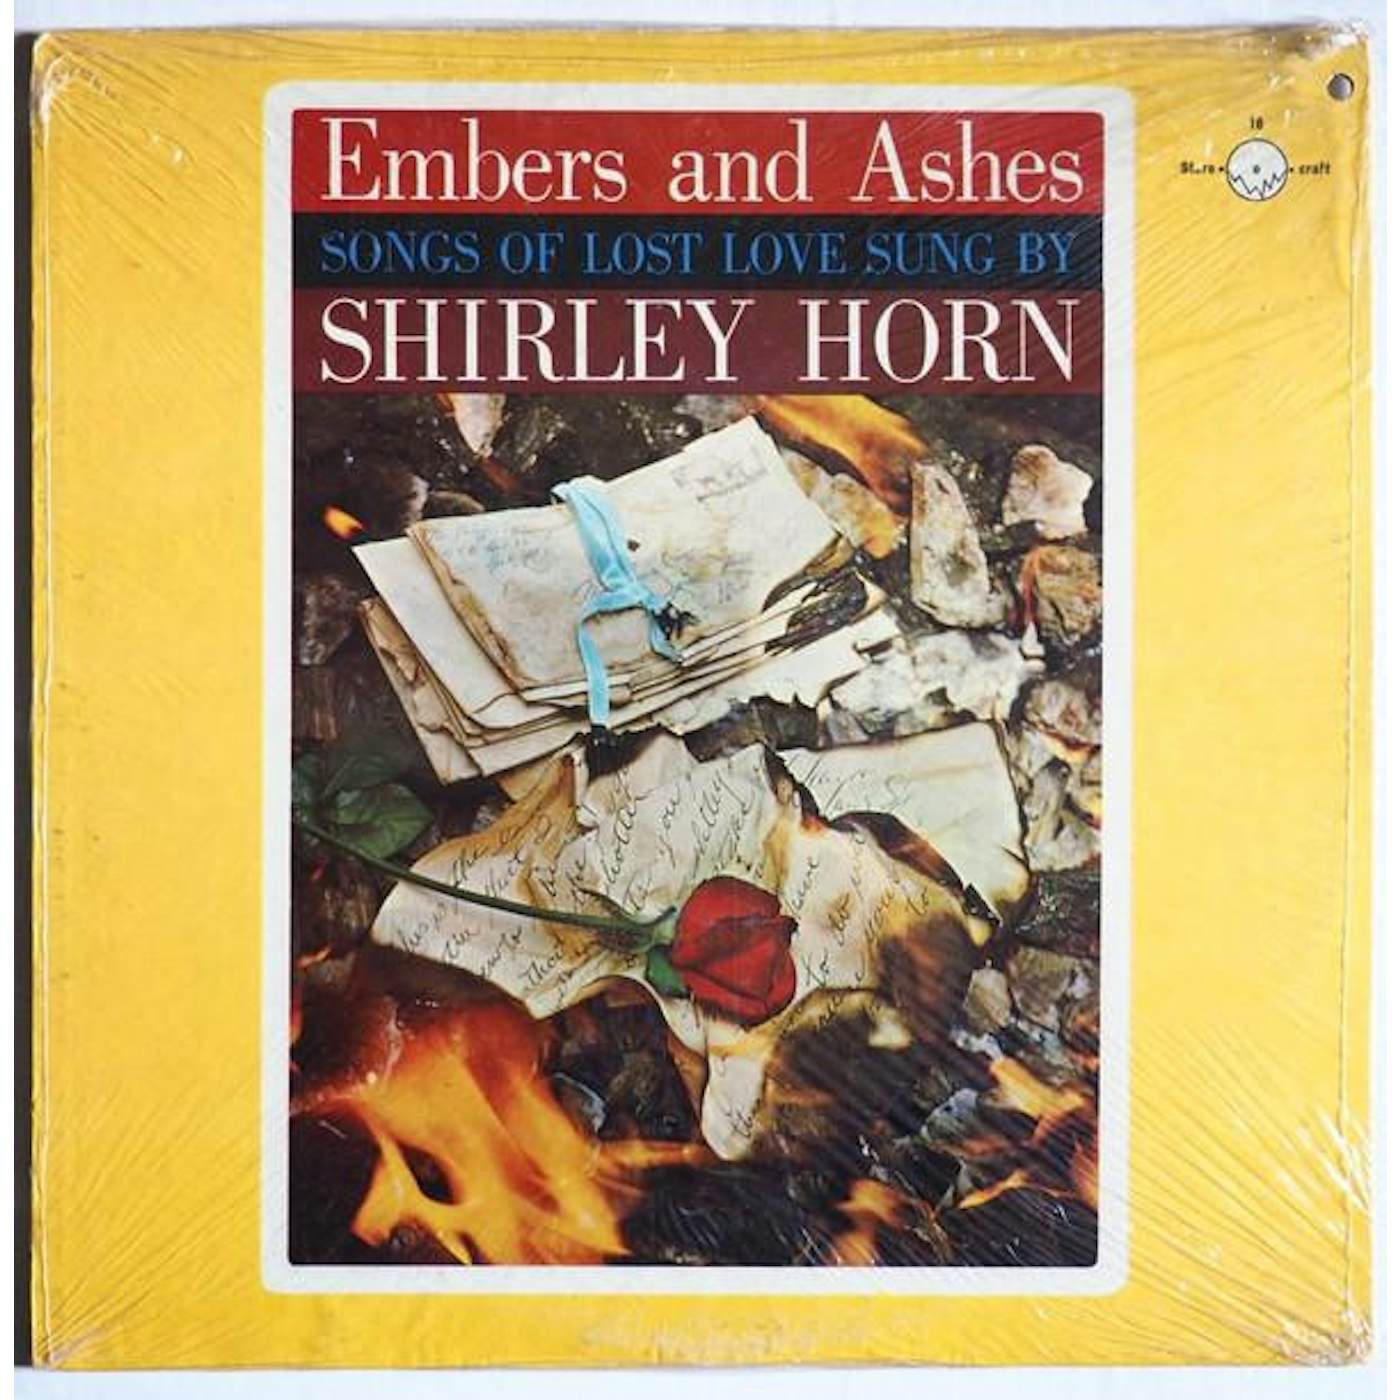 Shirley Horn Embers and Ashes Vinyl Record